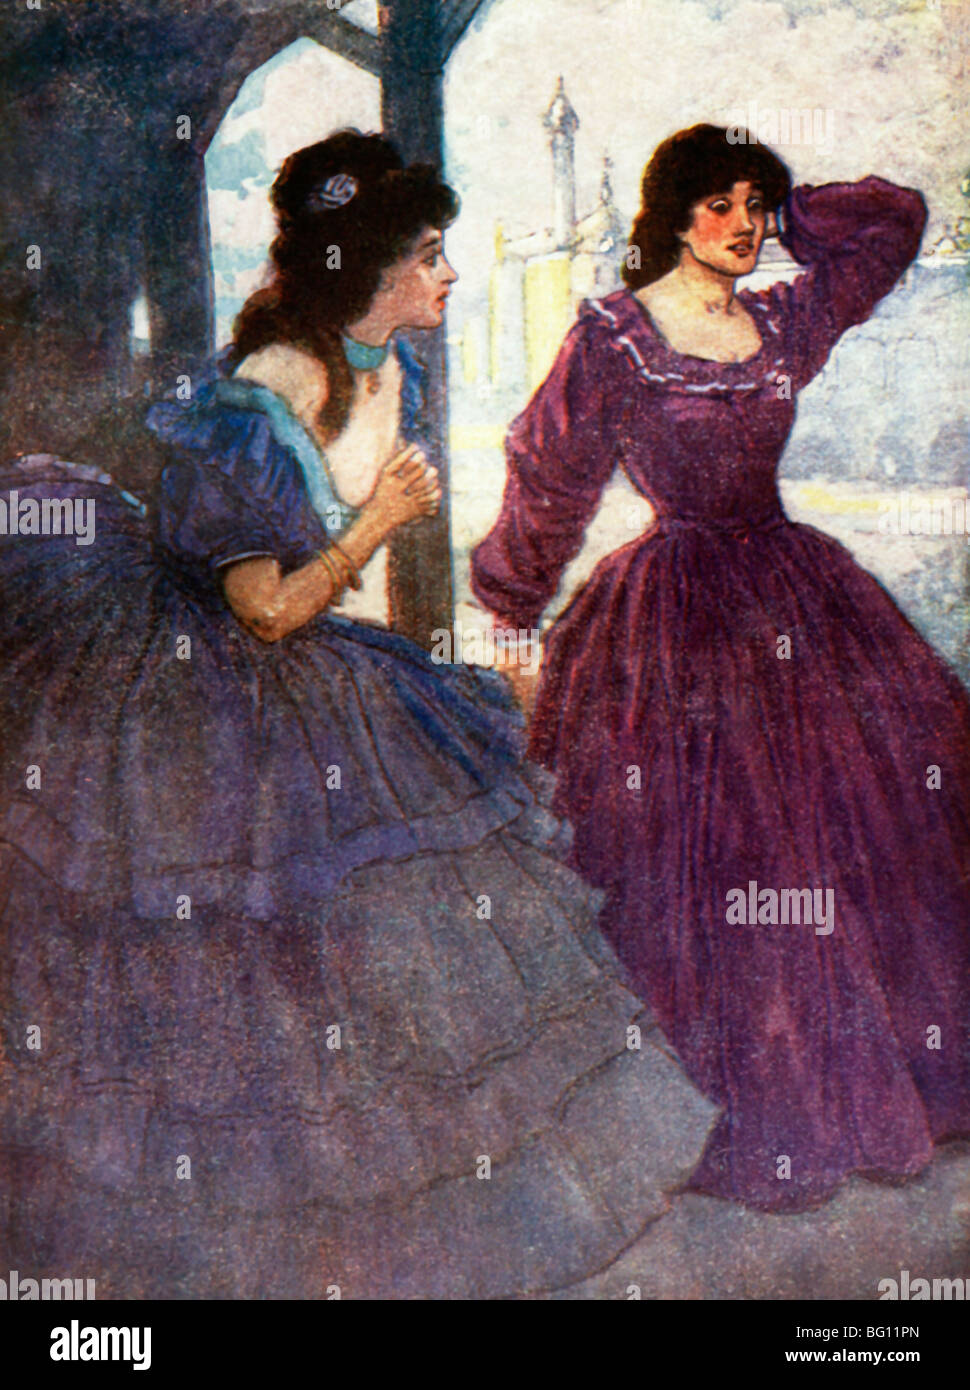 Illustration Of Jessie a sergeant's Wife And Her Mistress Who Could Hear The Pipes During The Siege At Lucknow In India Stock Photo